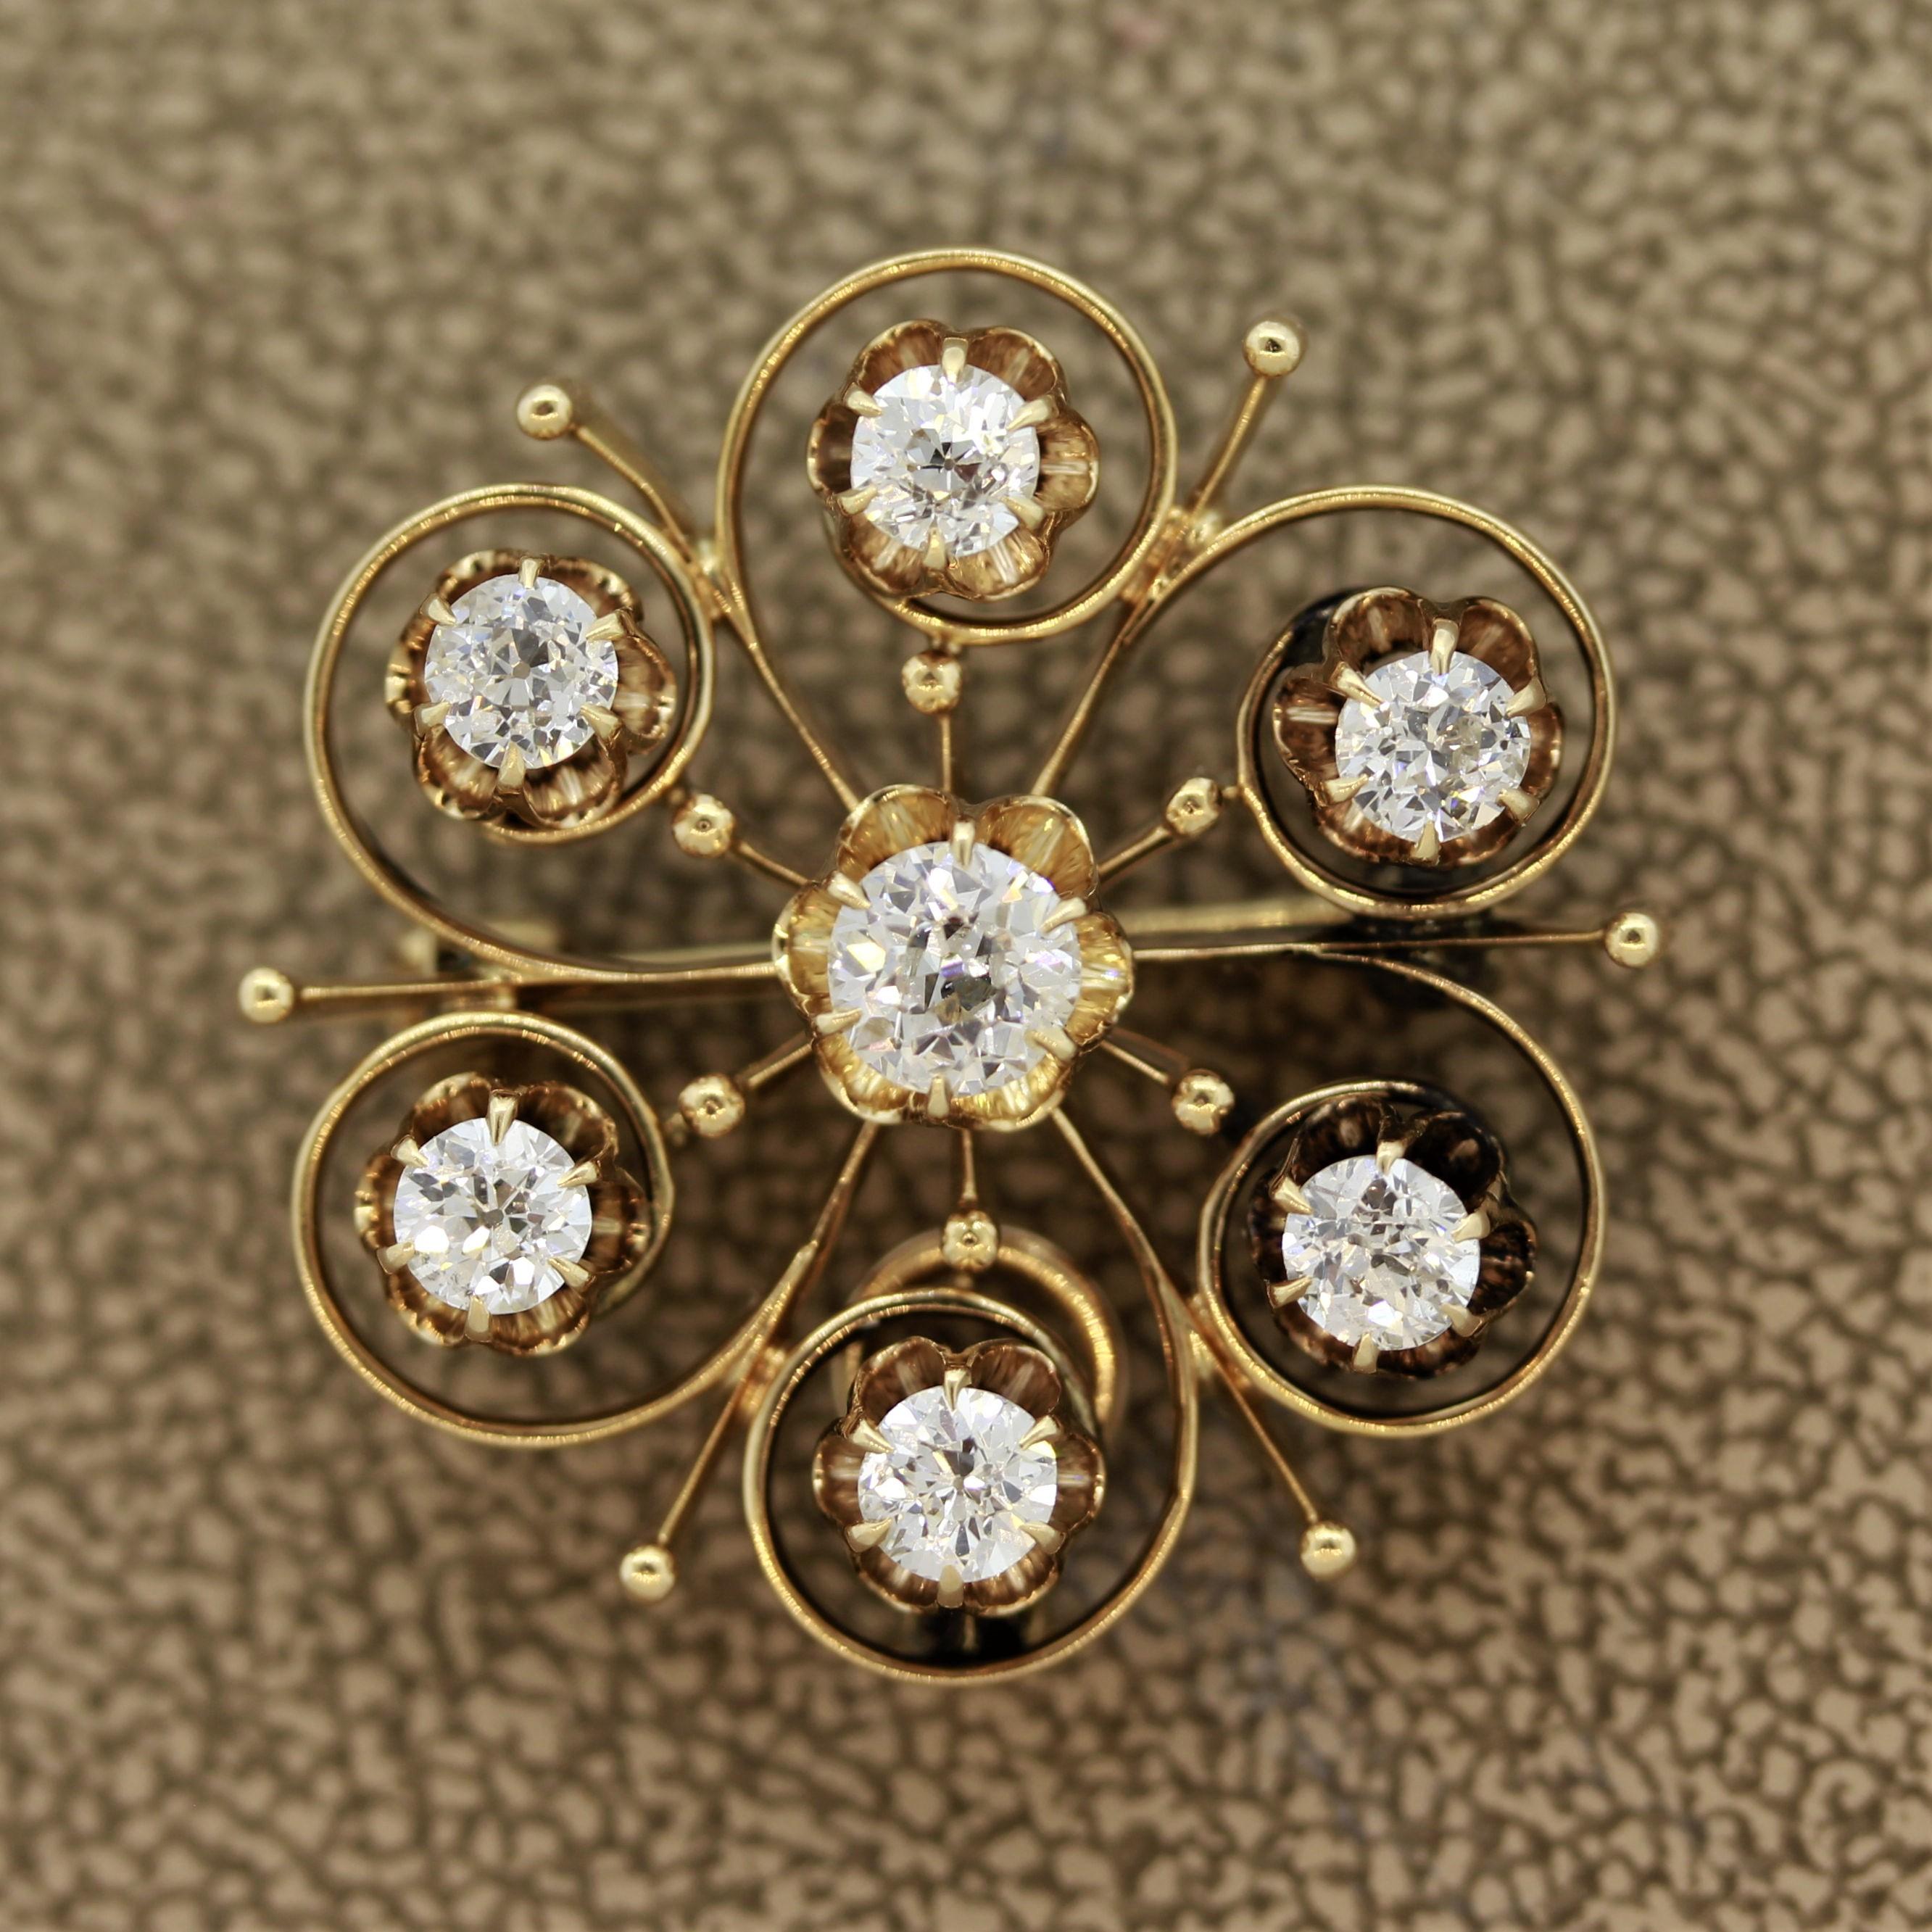 A classic Victorian piece from the 1890’s, this star brooch features 7 bright and full of life white diamonds. They weight a total of 1.25 carats and are European cut stones. Made in 14k gold and can be worn as a pendant.

Length: 1 inch